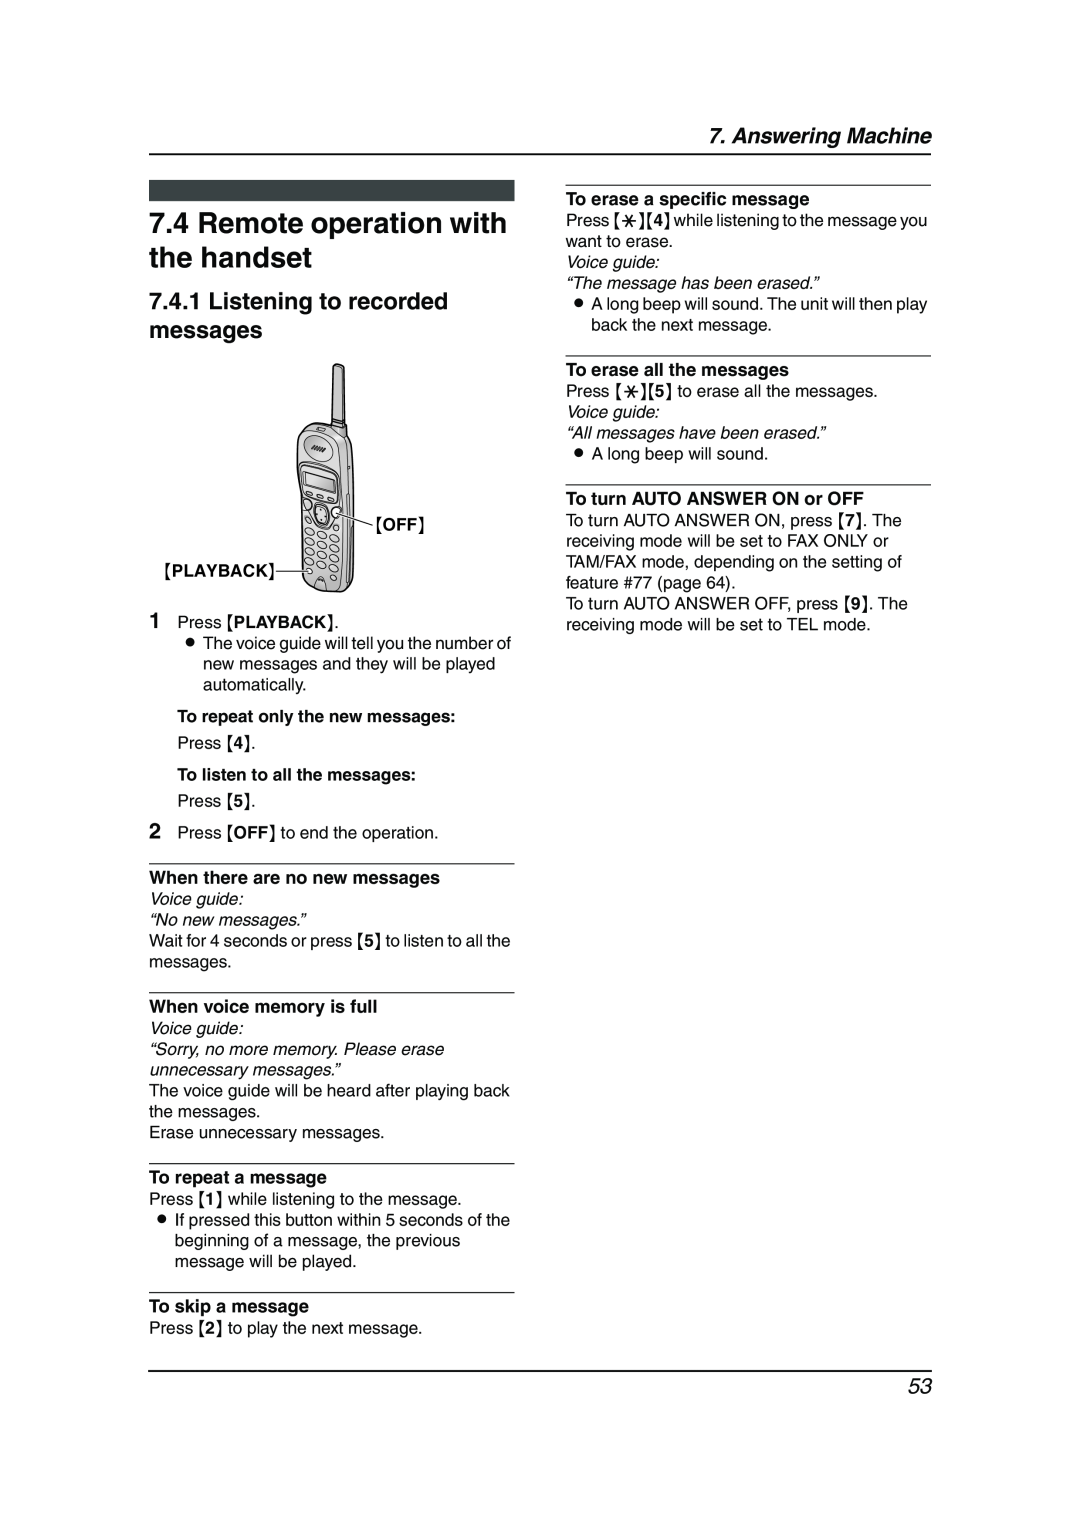 Panasonic KX-FPG377 Remote operation with the handset, Listening to recorded messages, Answering Machine, Voice guide 